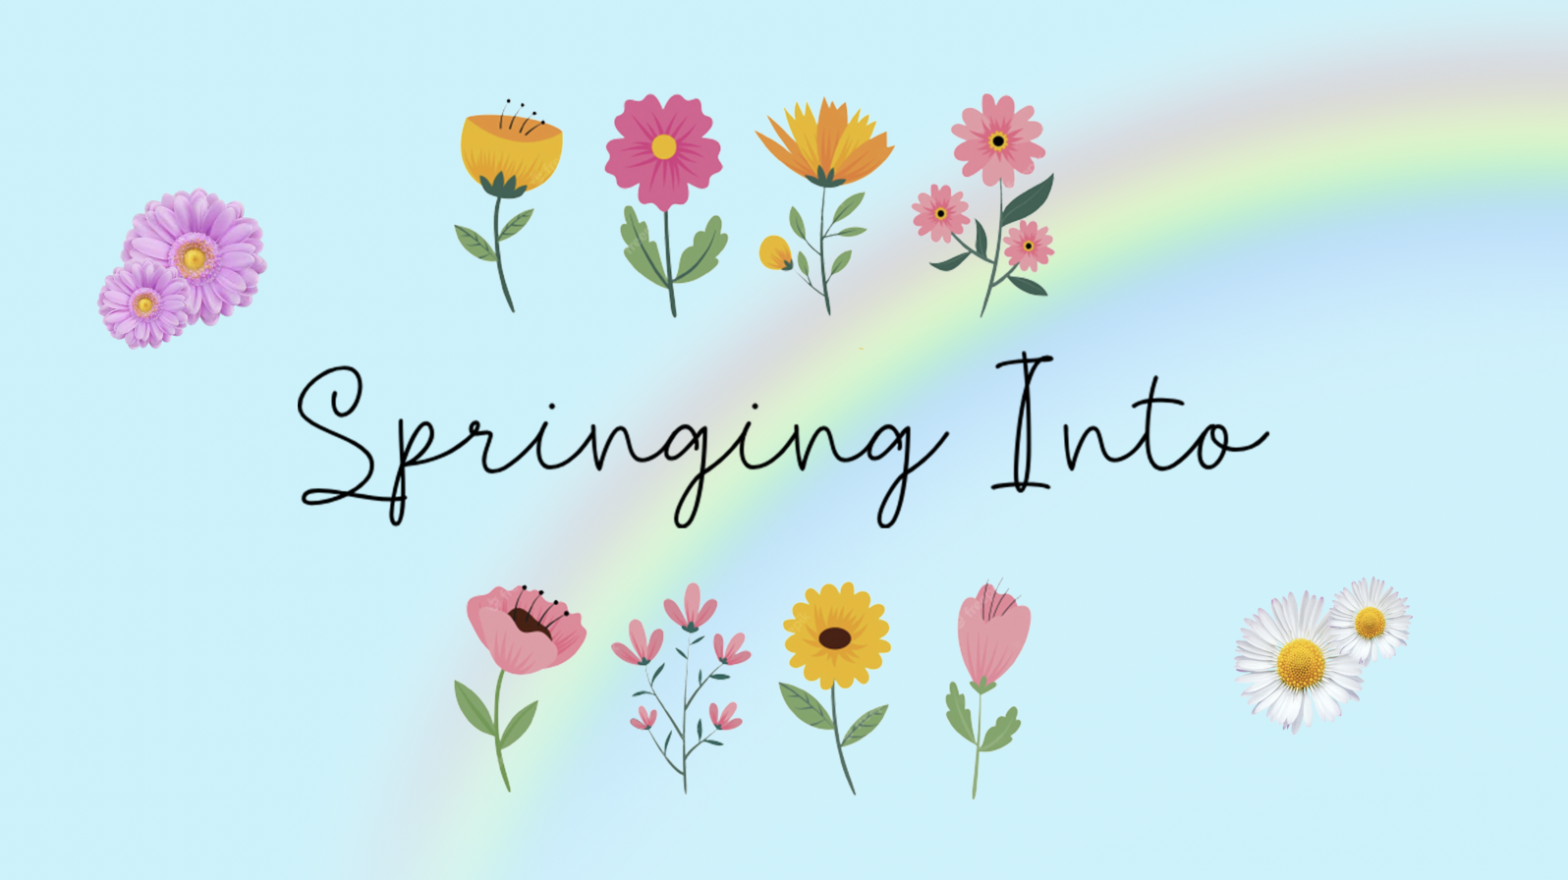 Baby blue background with flowers surrounding the title of the playlist; Springing Into. A rainbow crosses the background.